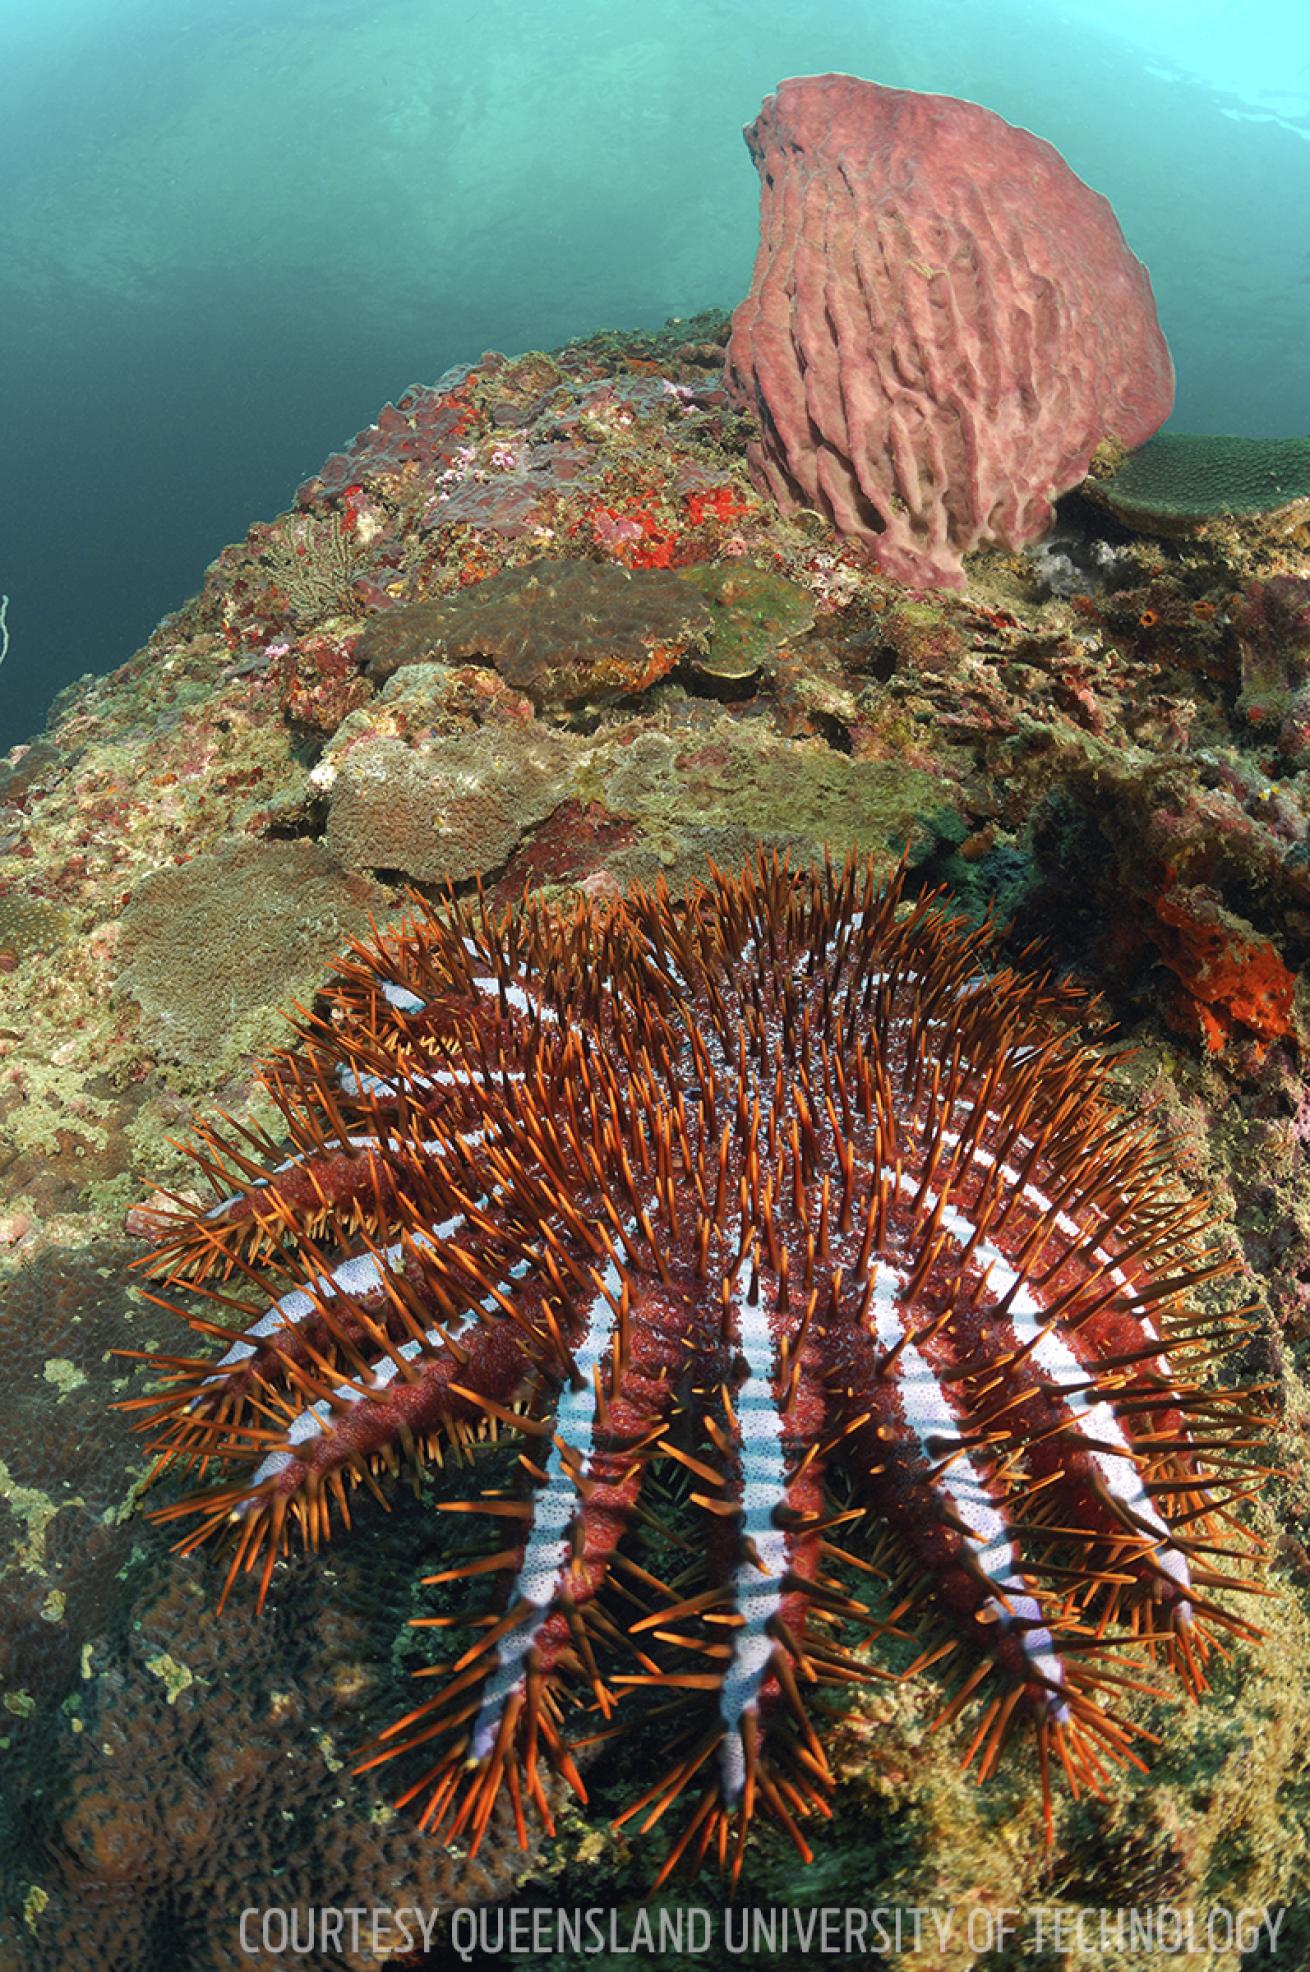 crown of thorns starfish killing coral reefs